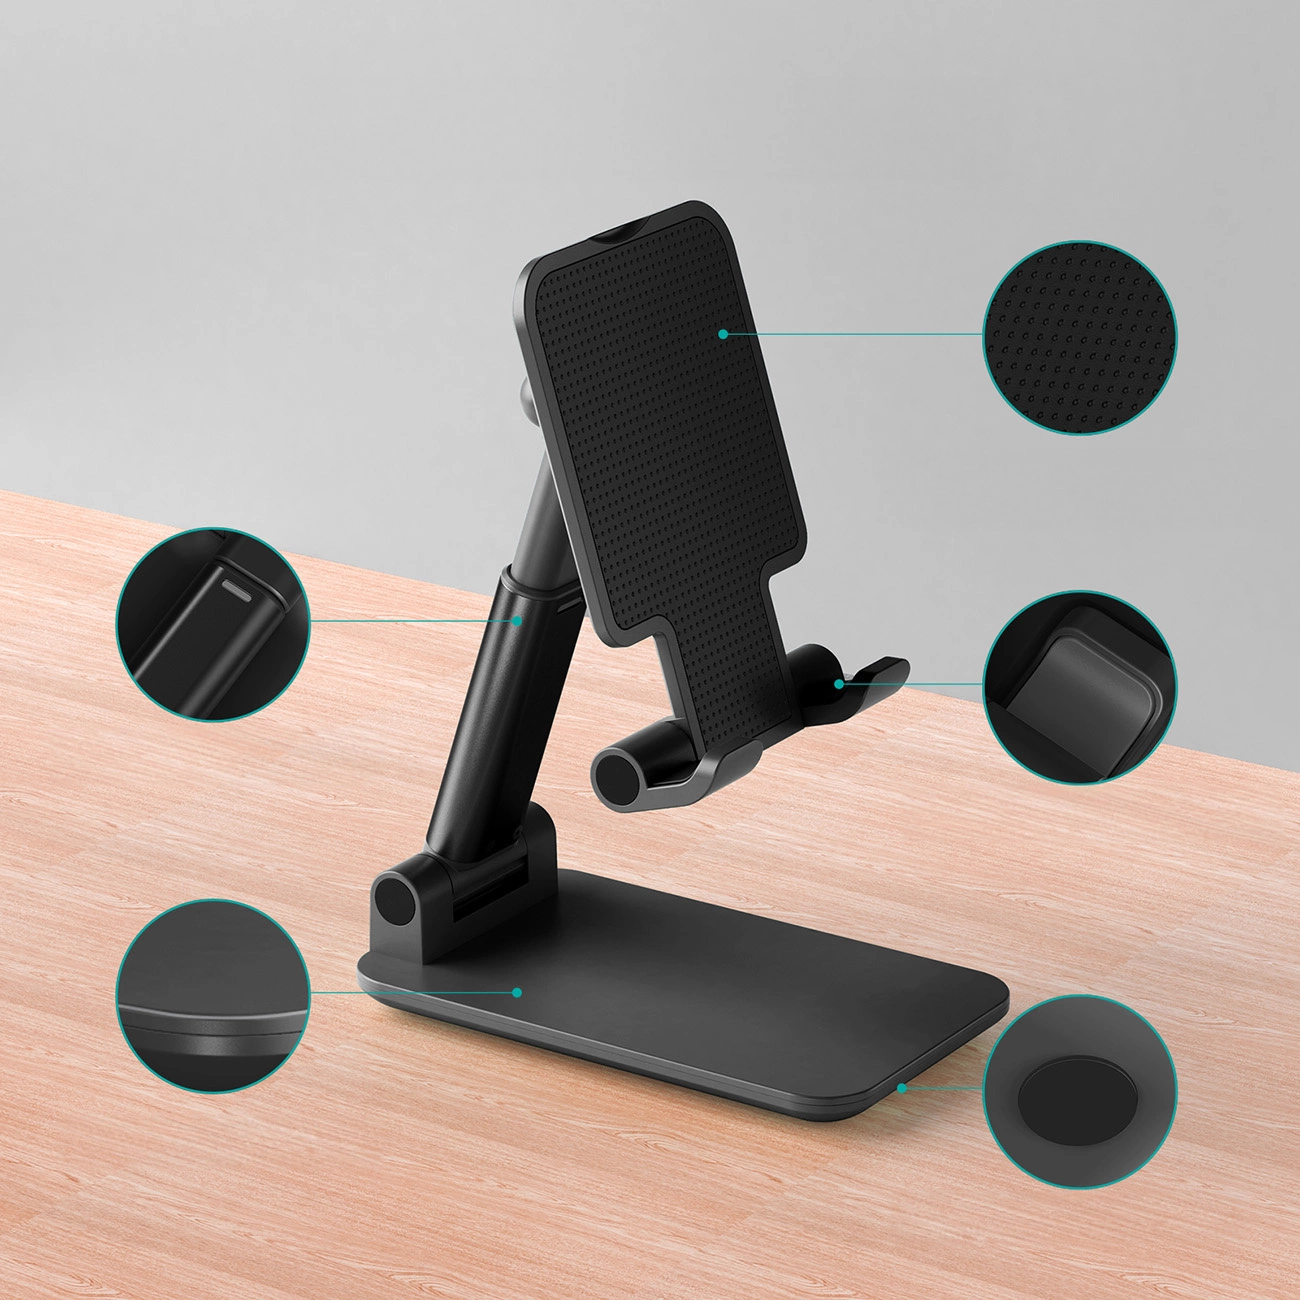 Choetech H88-BK stand standing on a desk with a closer look at the details